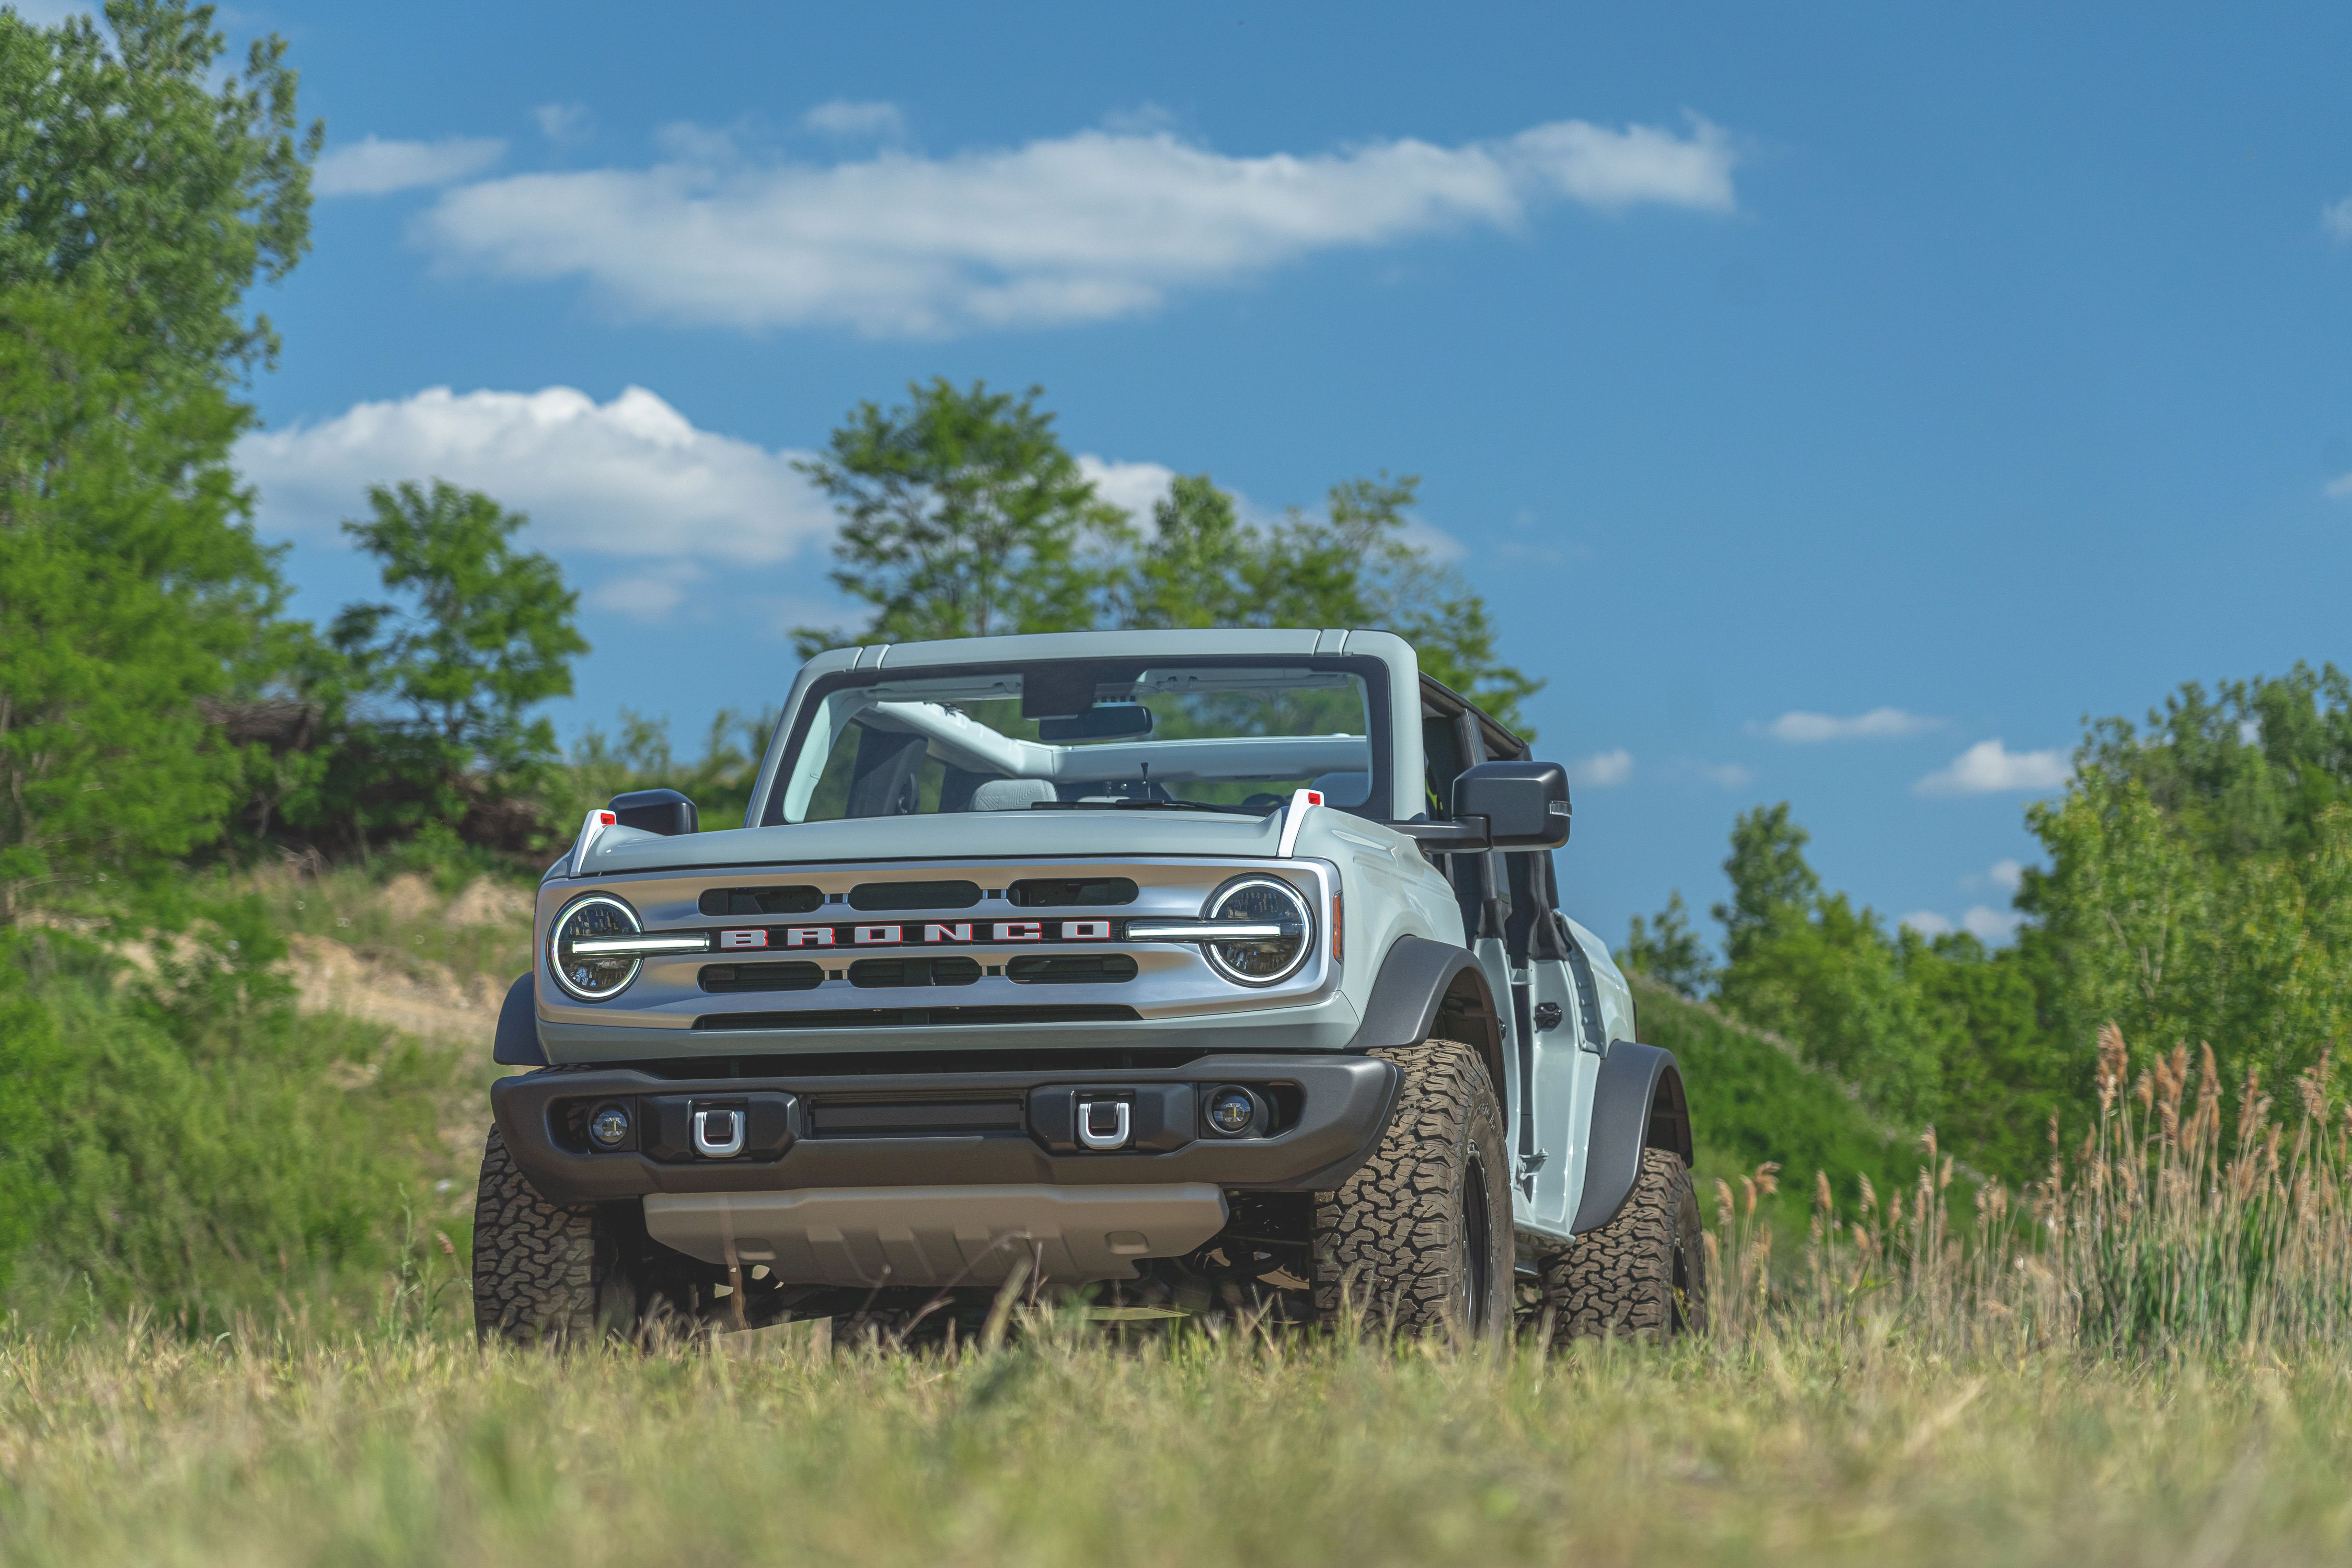 View Photos Of The 2021 Ford Bronco 4 Door